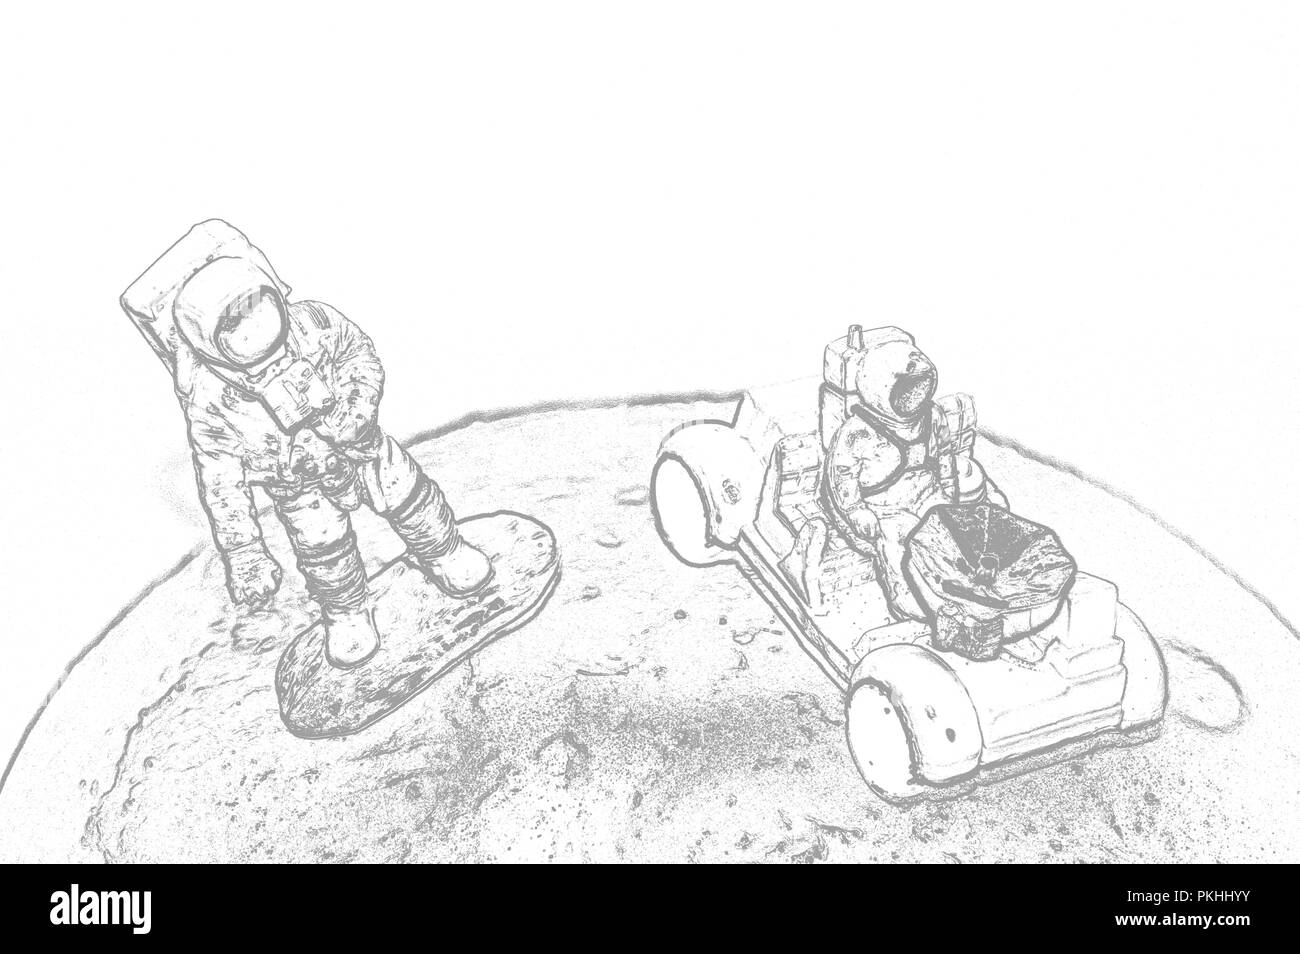 Two astronauts on the moon rover on the moon. Illustration Stock Photo